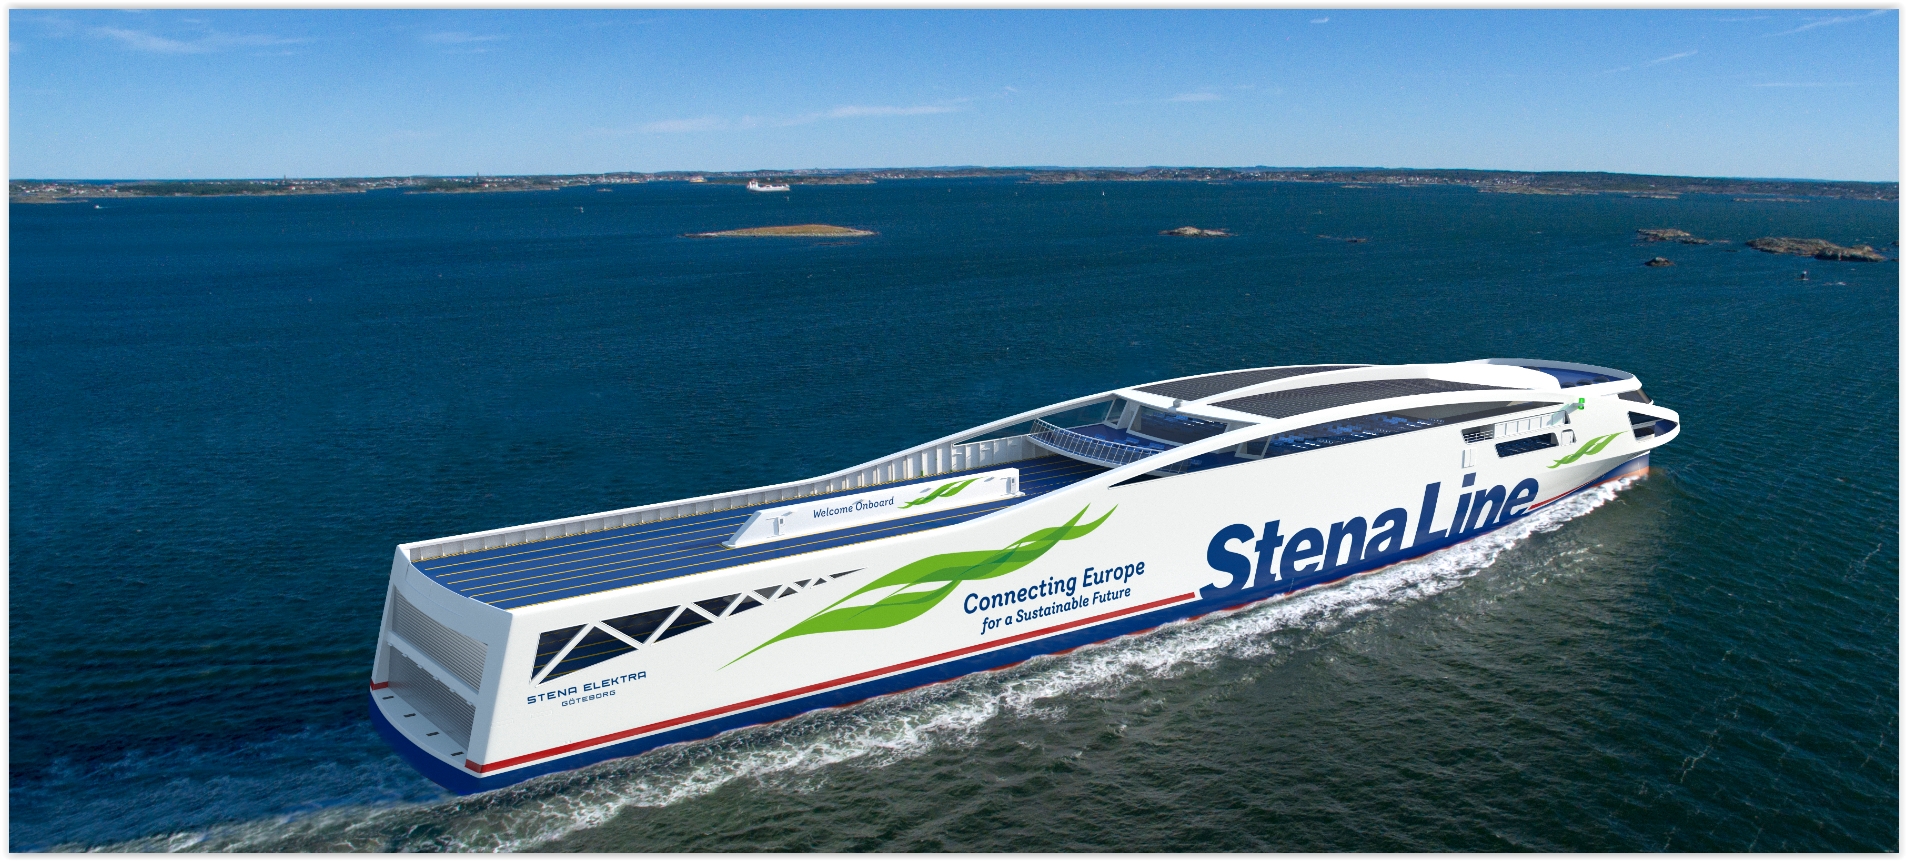 Stena Line reduces CO2 ten years ahead of emissions’ targets